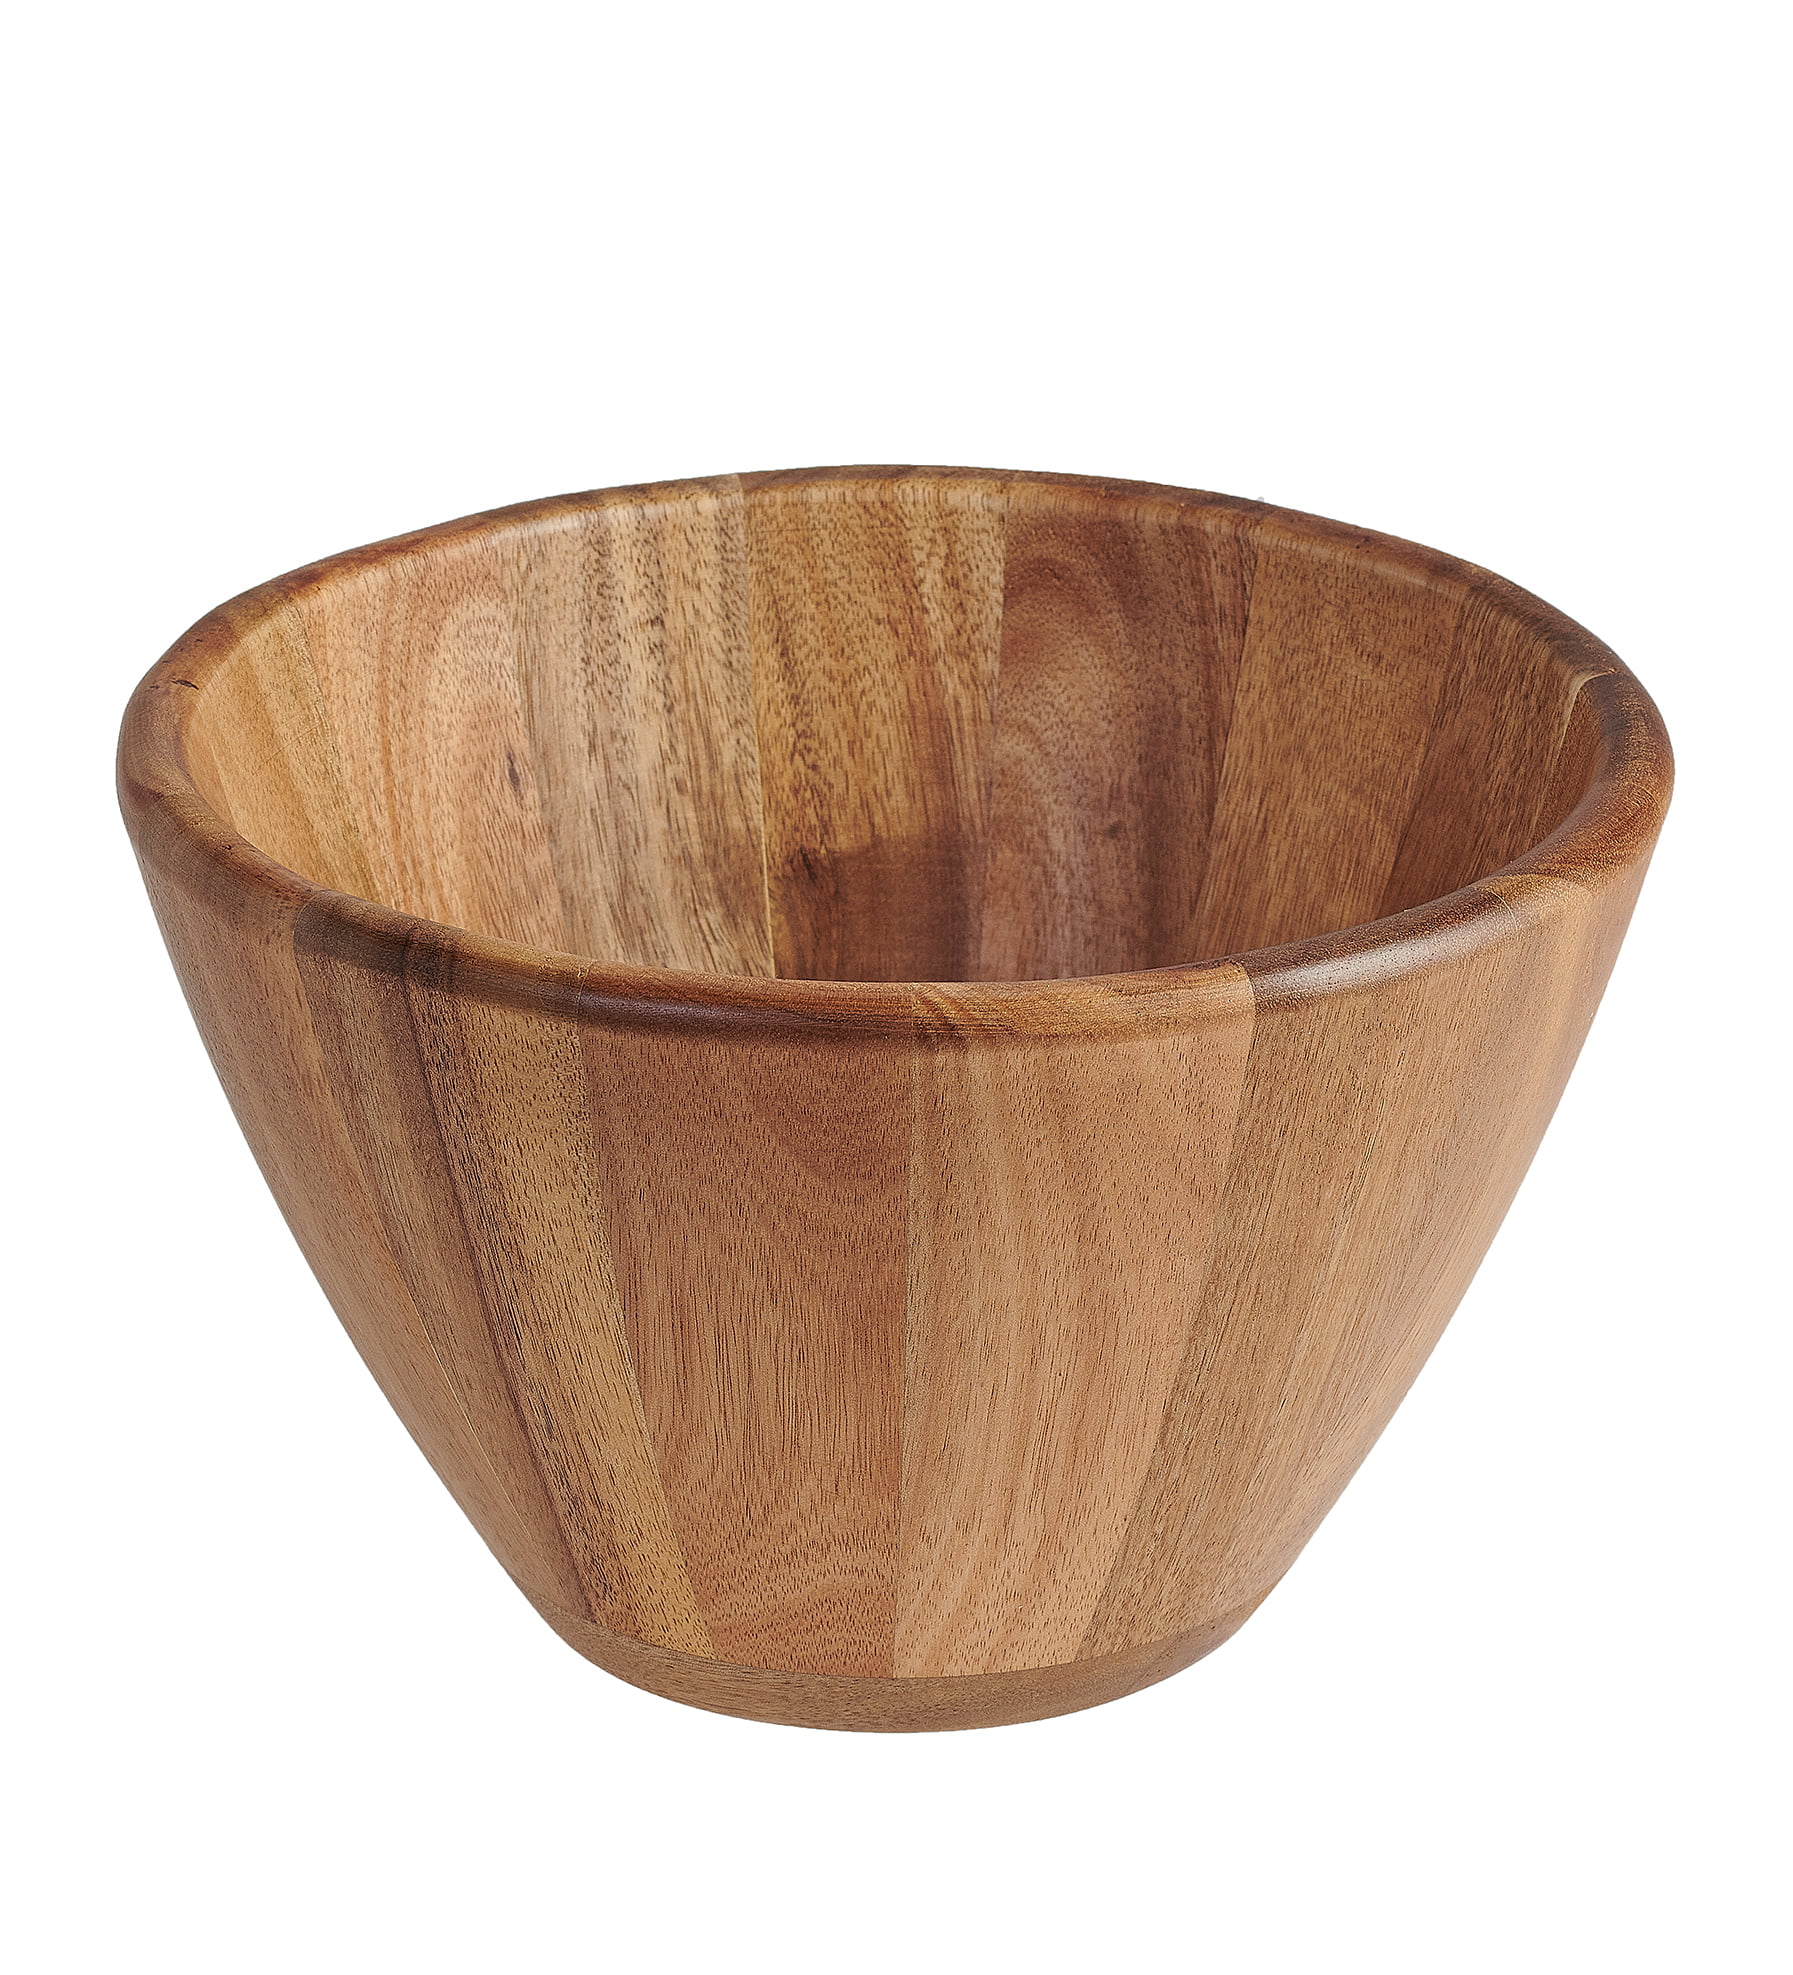 Wooden Bowl diameter 20 cm 8 inches perfect for snacks nuts chips 